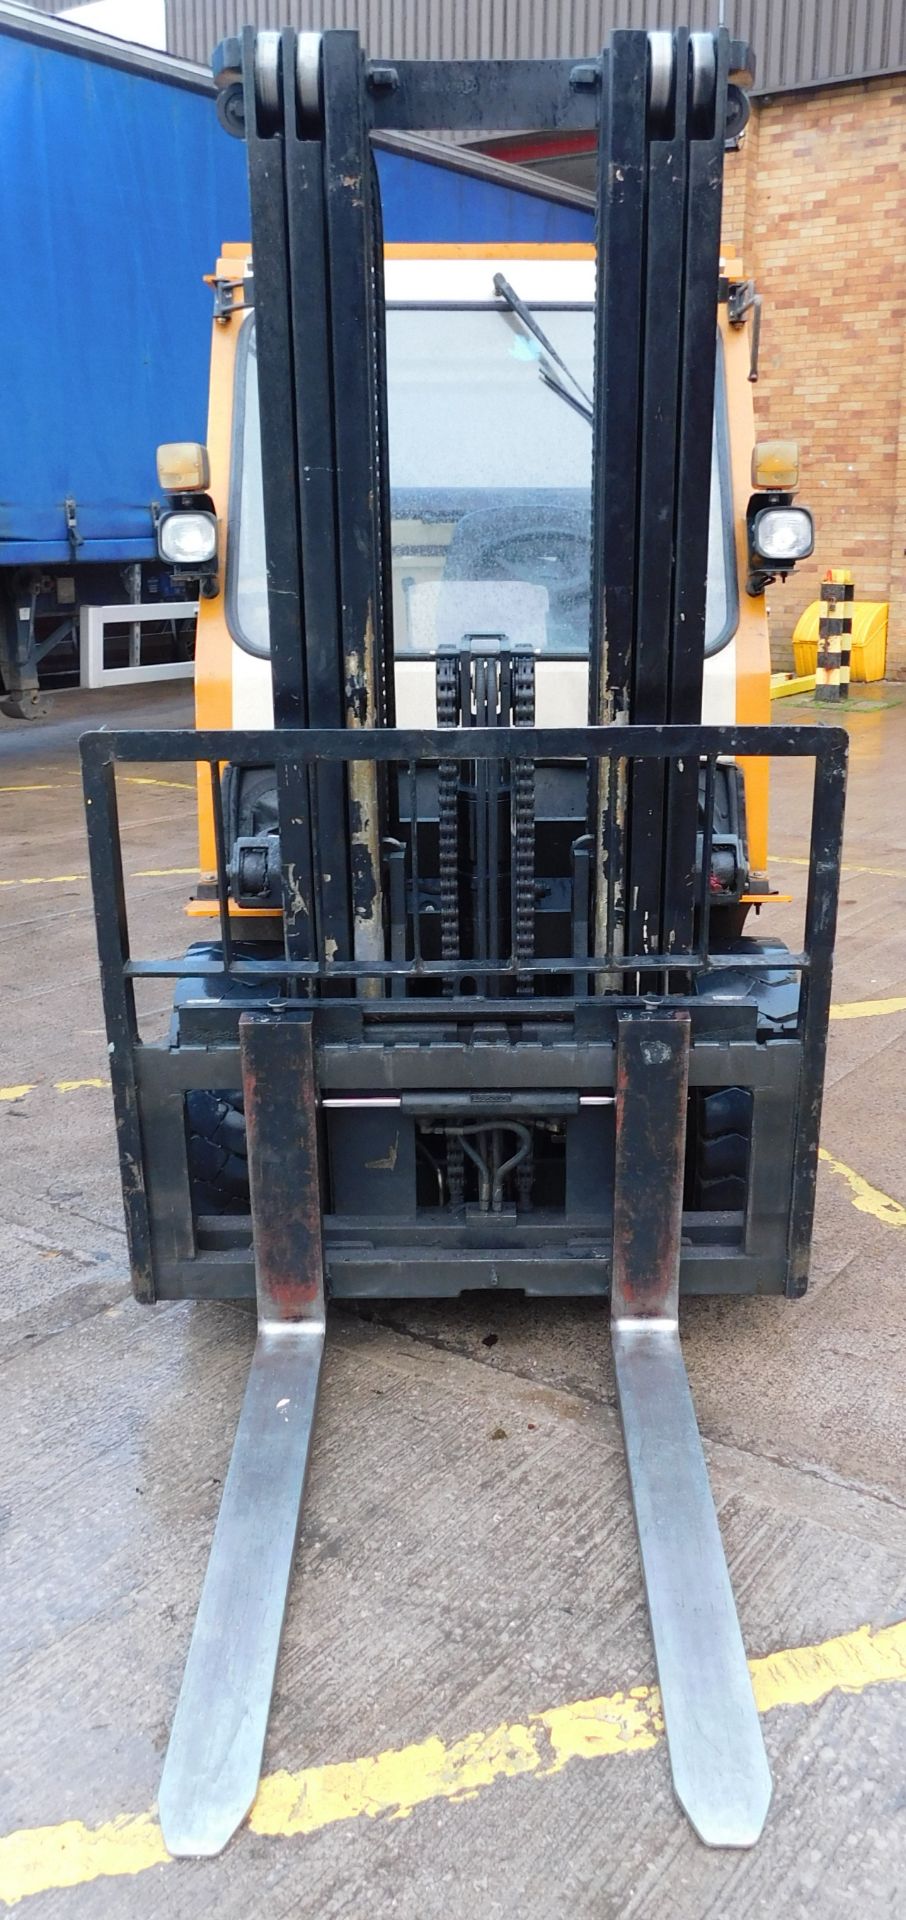 2007 Samuk H35L Gas Powered Forklift, Serial Number 070100559 (Located North Manchester. Please - Image 5 of 13